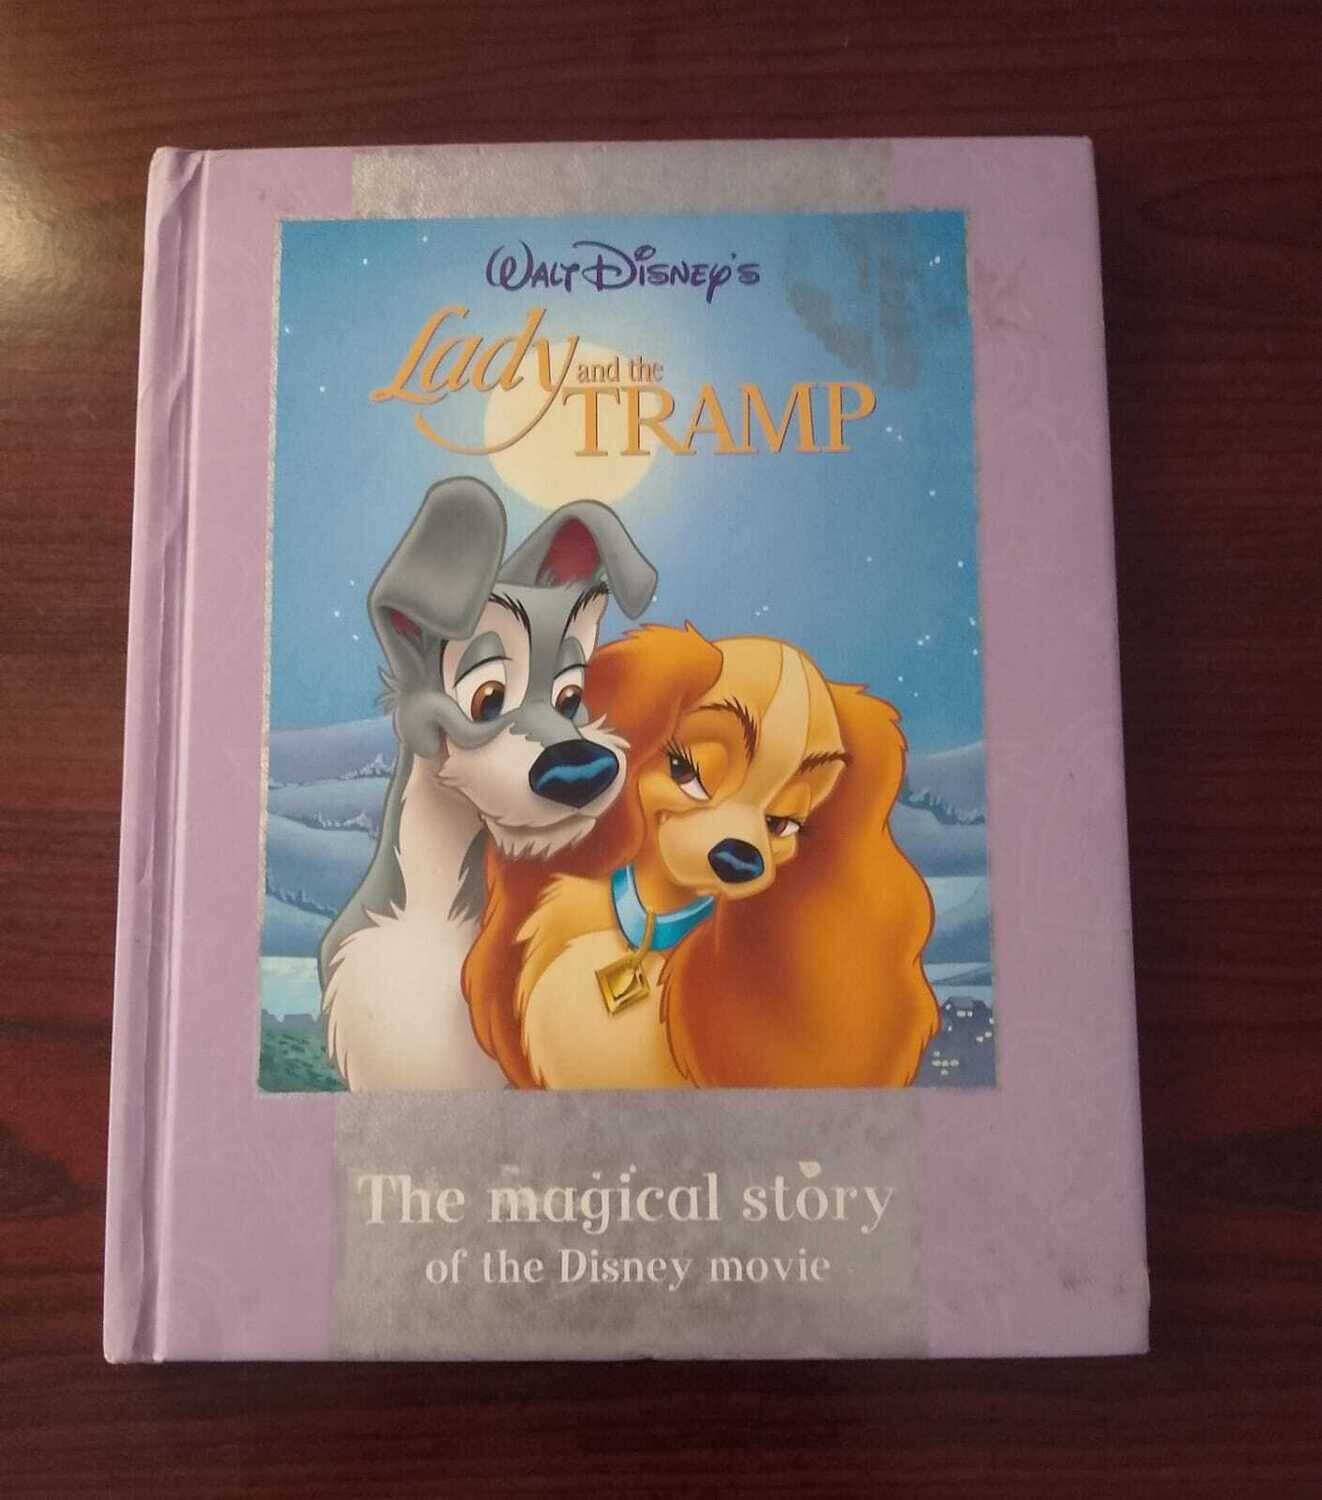 Walt Disney's lady and the tramp